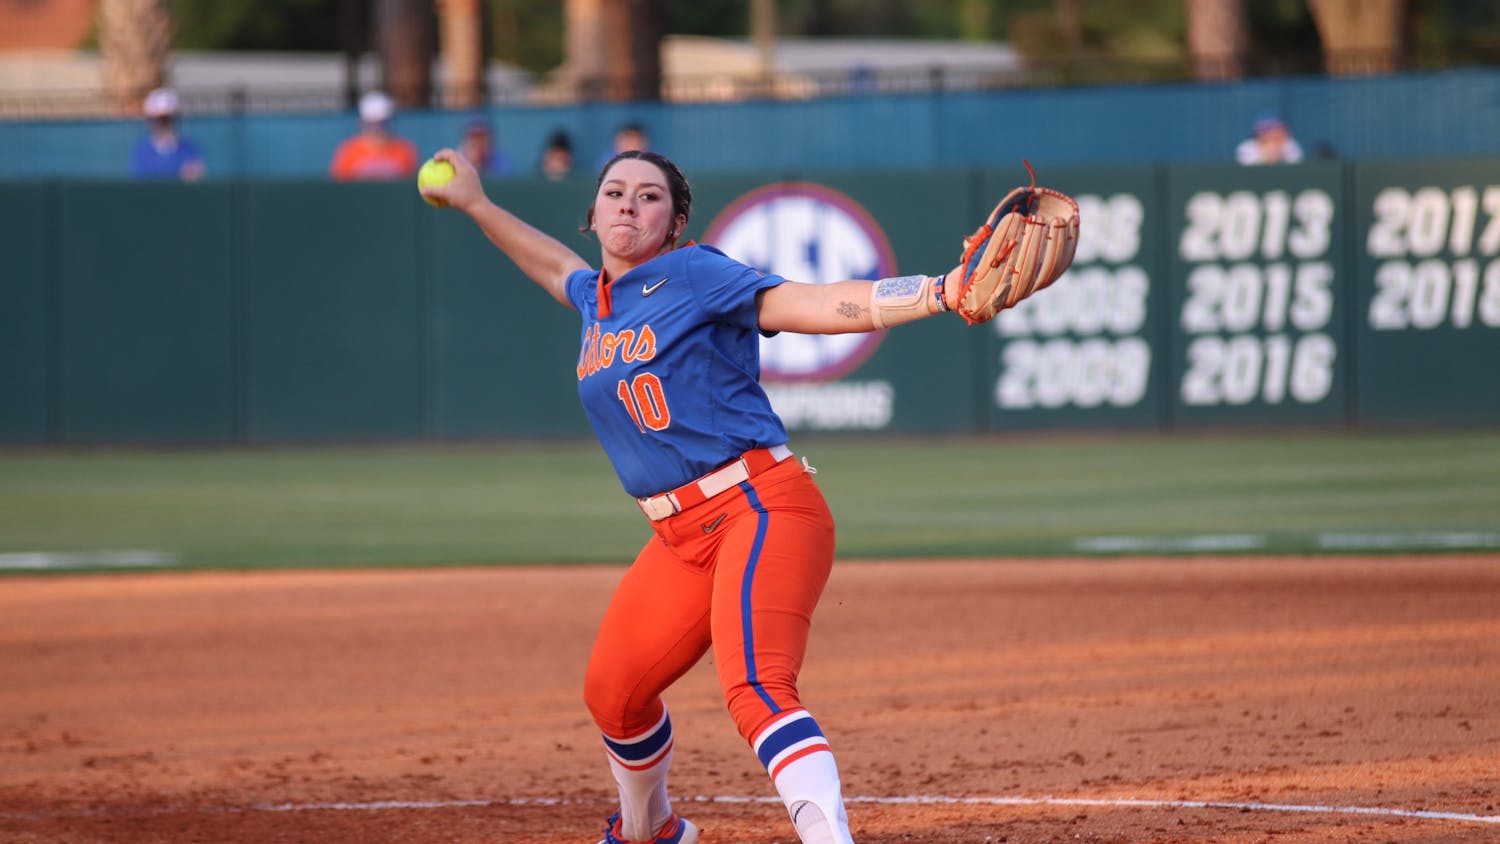 Natalie Lugo steps through and delivers a pitch against South Carolina on April 24th. Lugo returns after posting a remarkable 1.74 ERA last season.